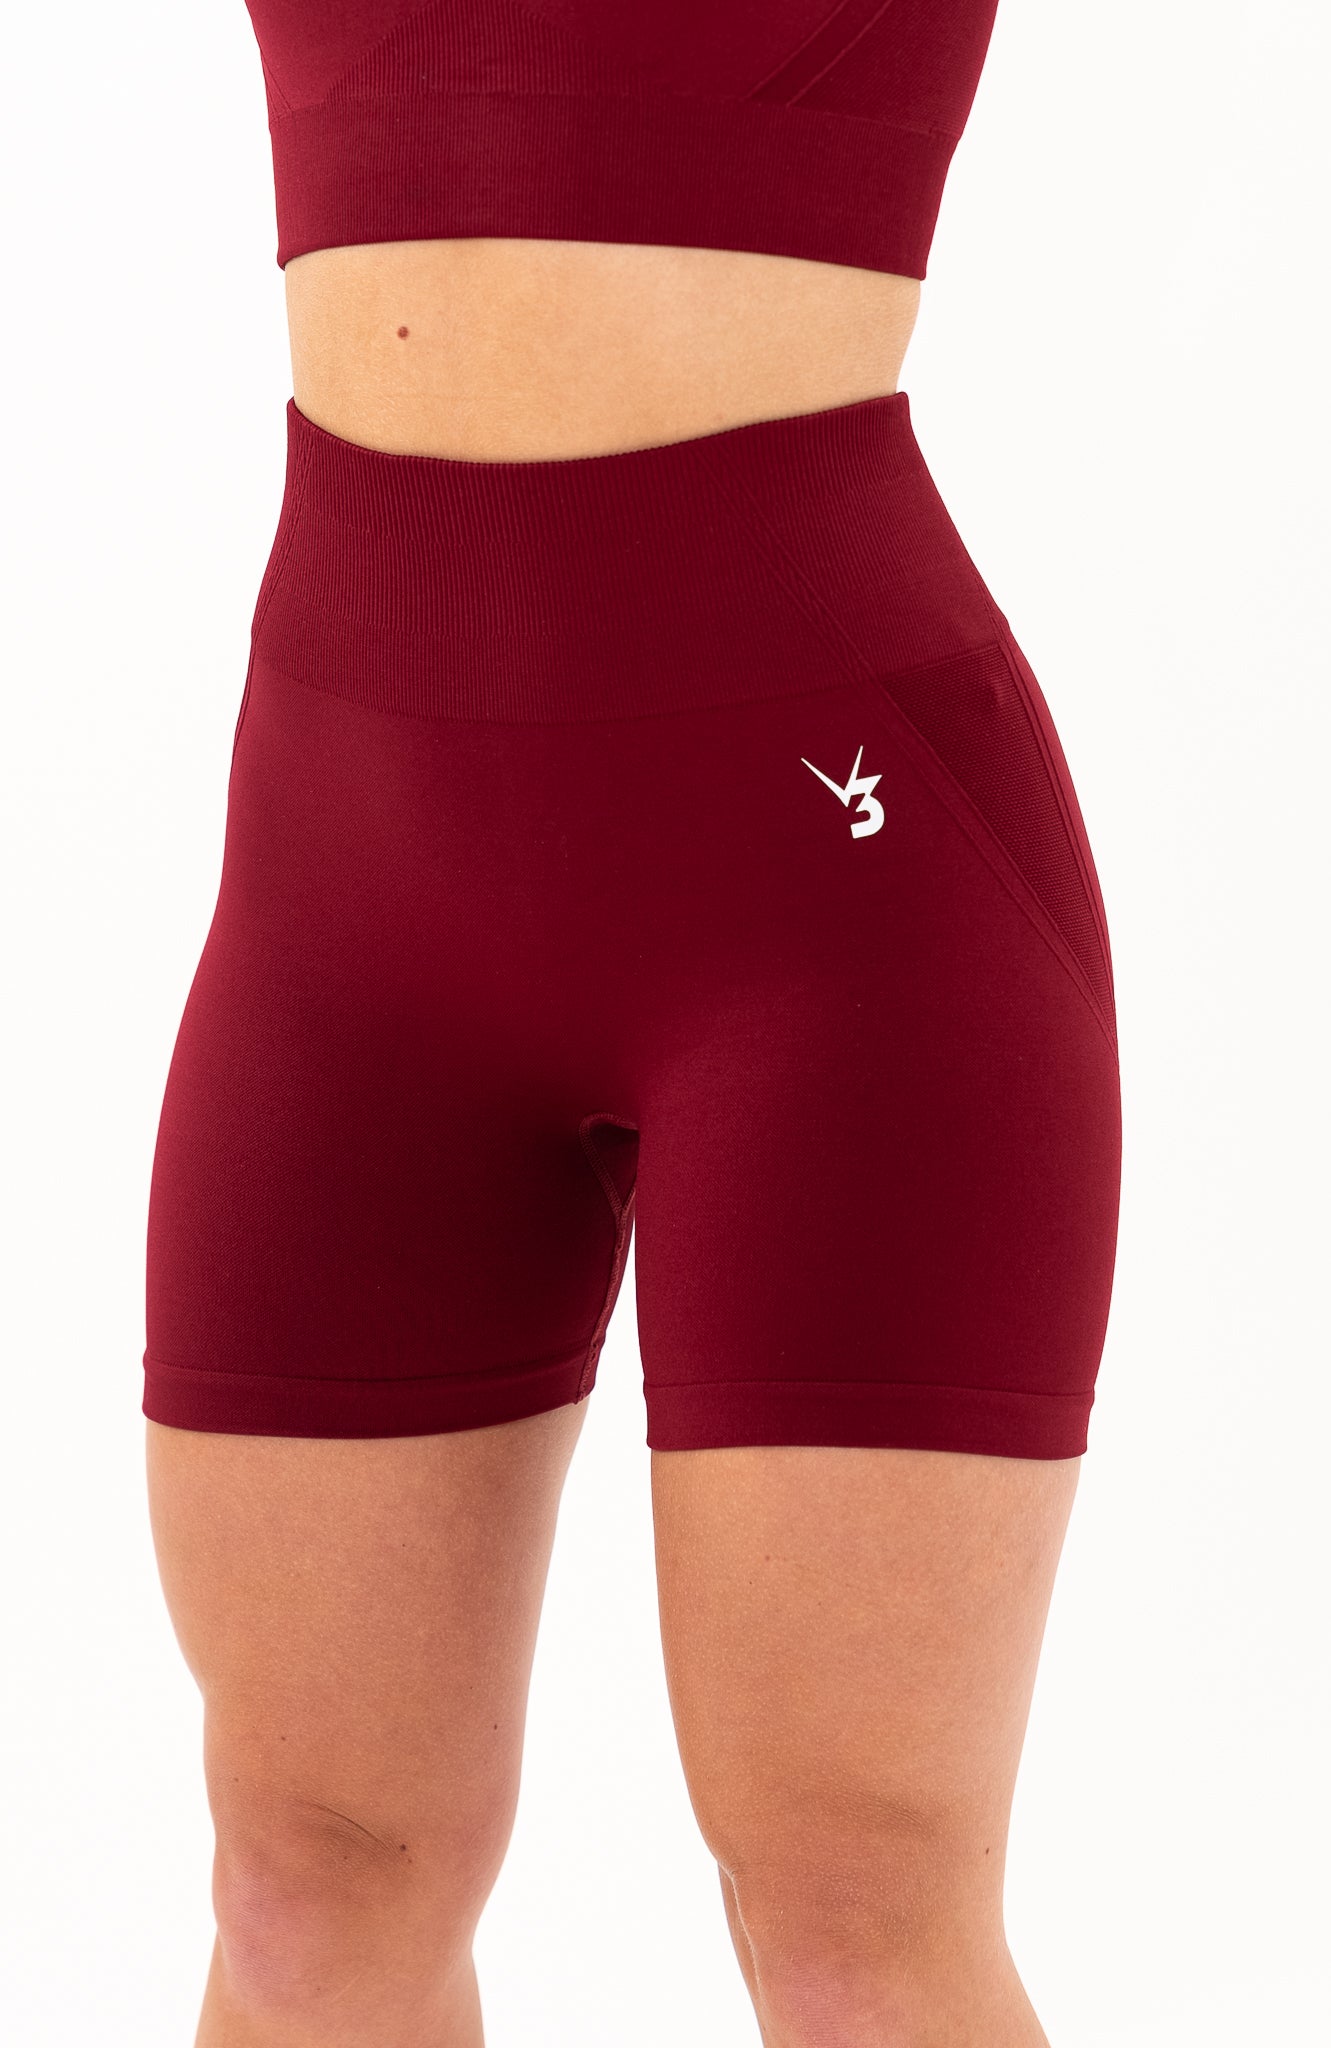 redbaysand Women's Tempo seamless scrunch bum shaping high waisted cycle shorts in burgundy red – Squat proof 5 inch leg gym shorts for workouts training, Running, yoga, bodybuilding and bikini fitness.